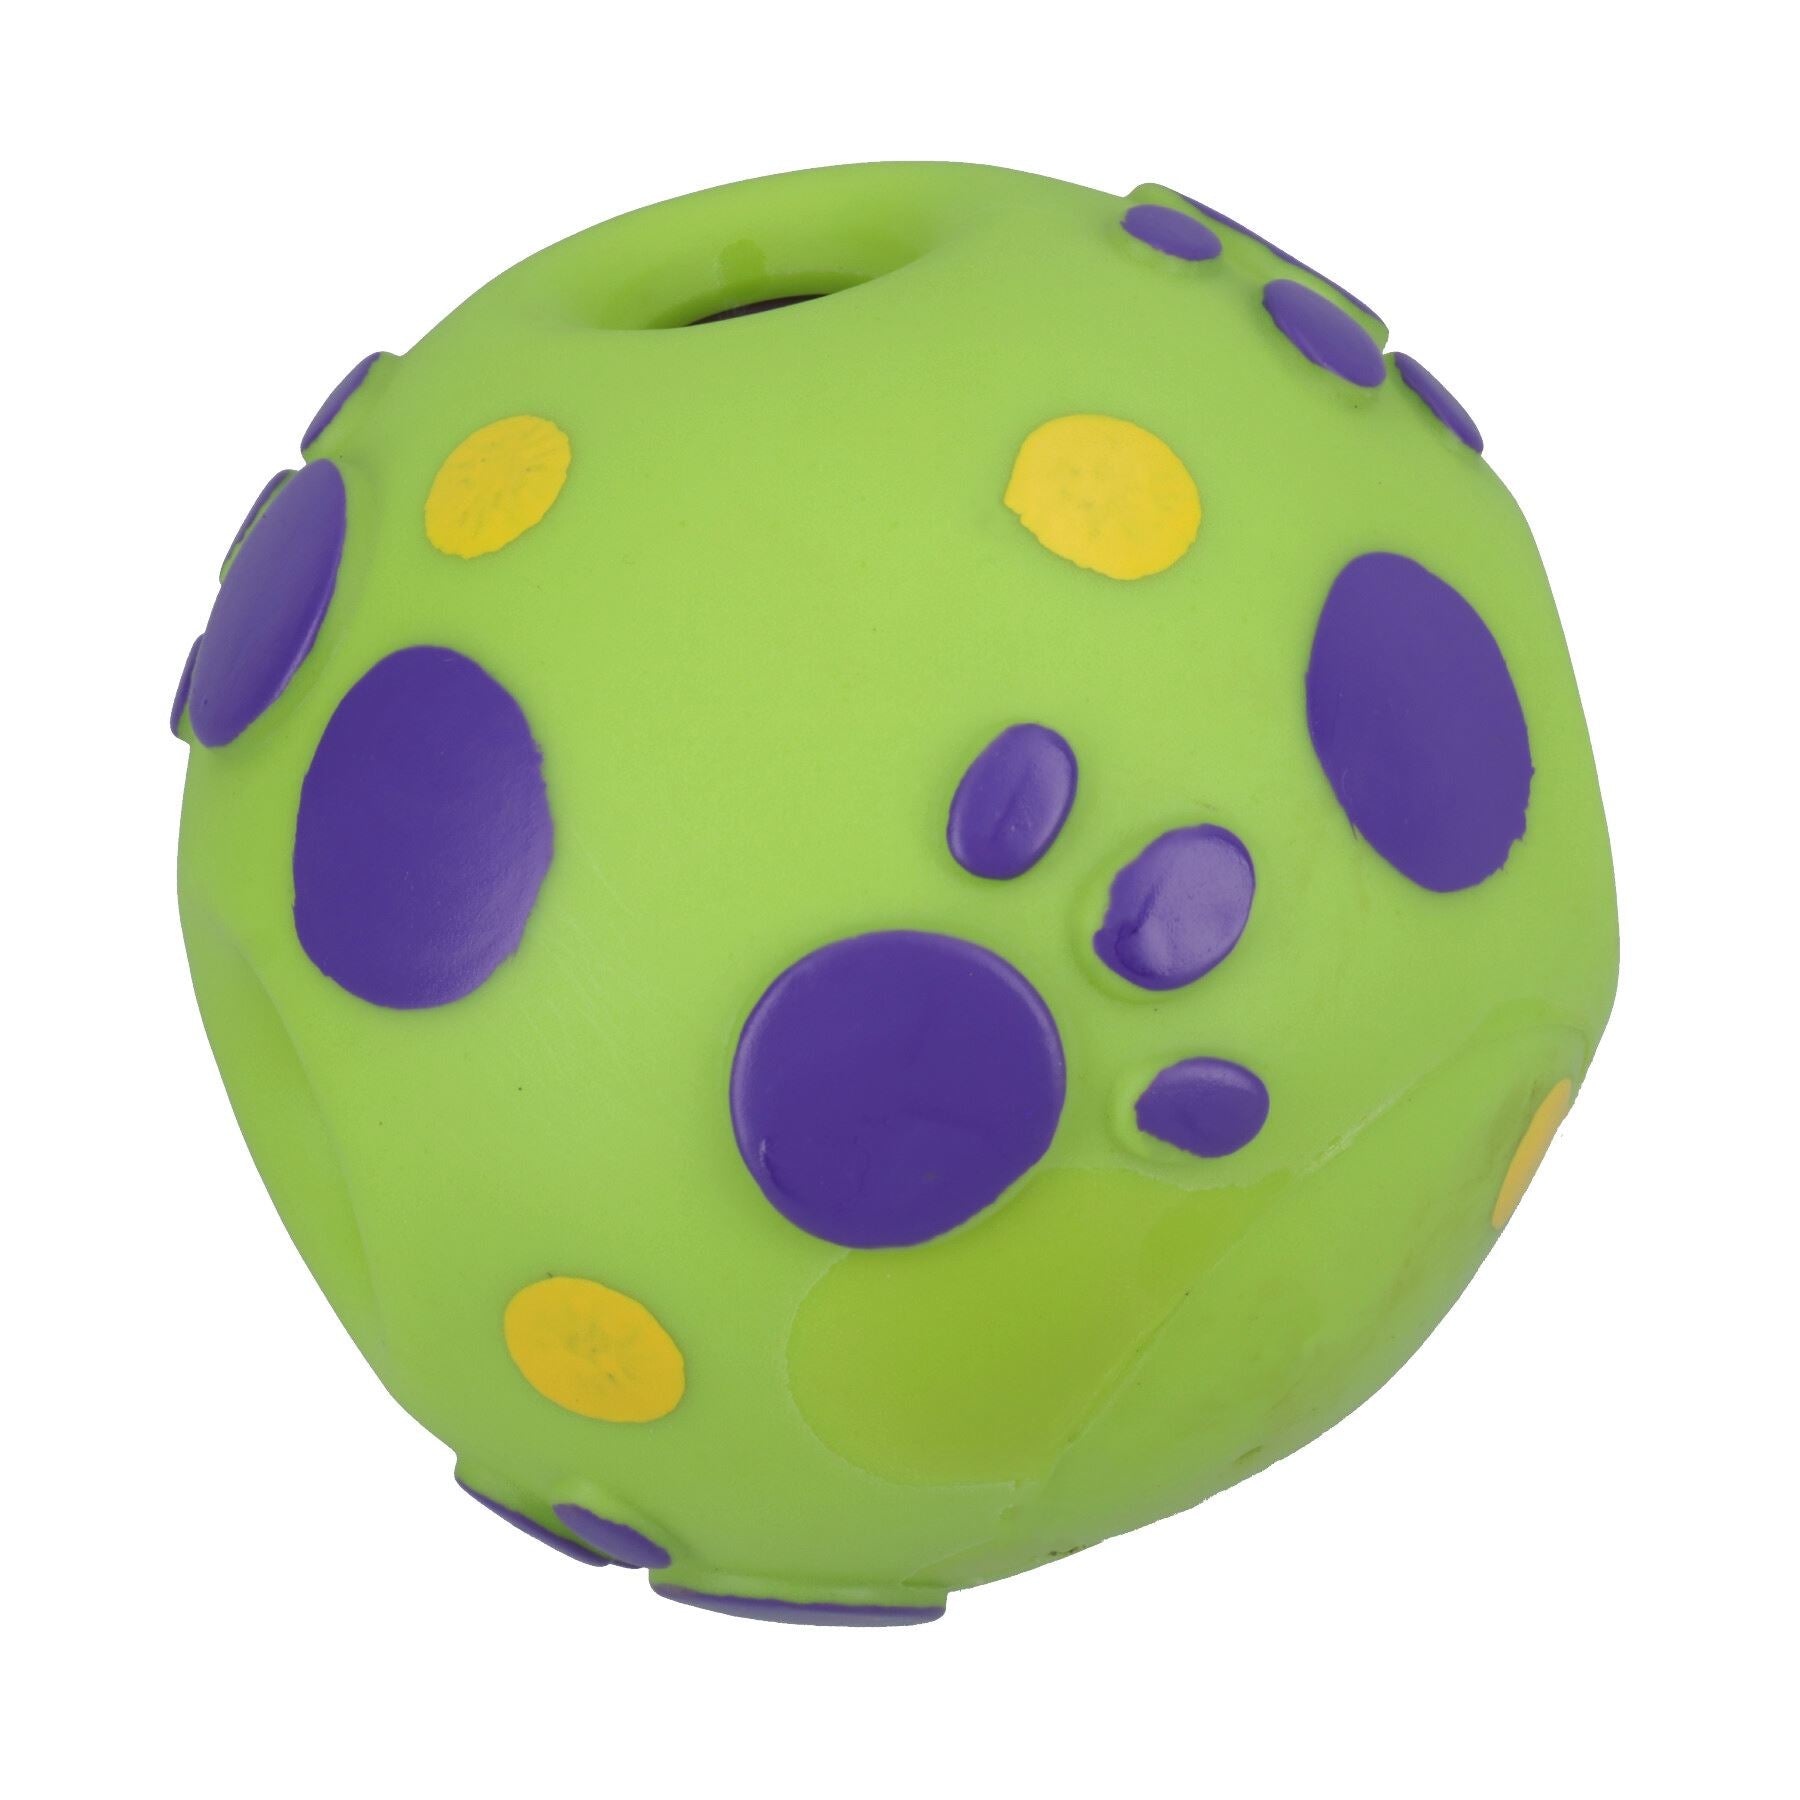 1 Laughing Ball Giggling Sound Motion Activated Play Dog Toy-Assorted Colour